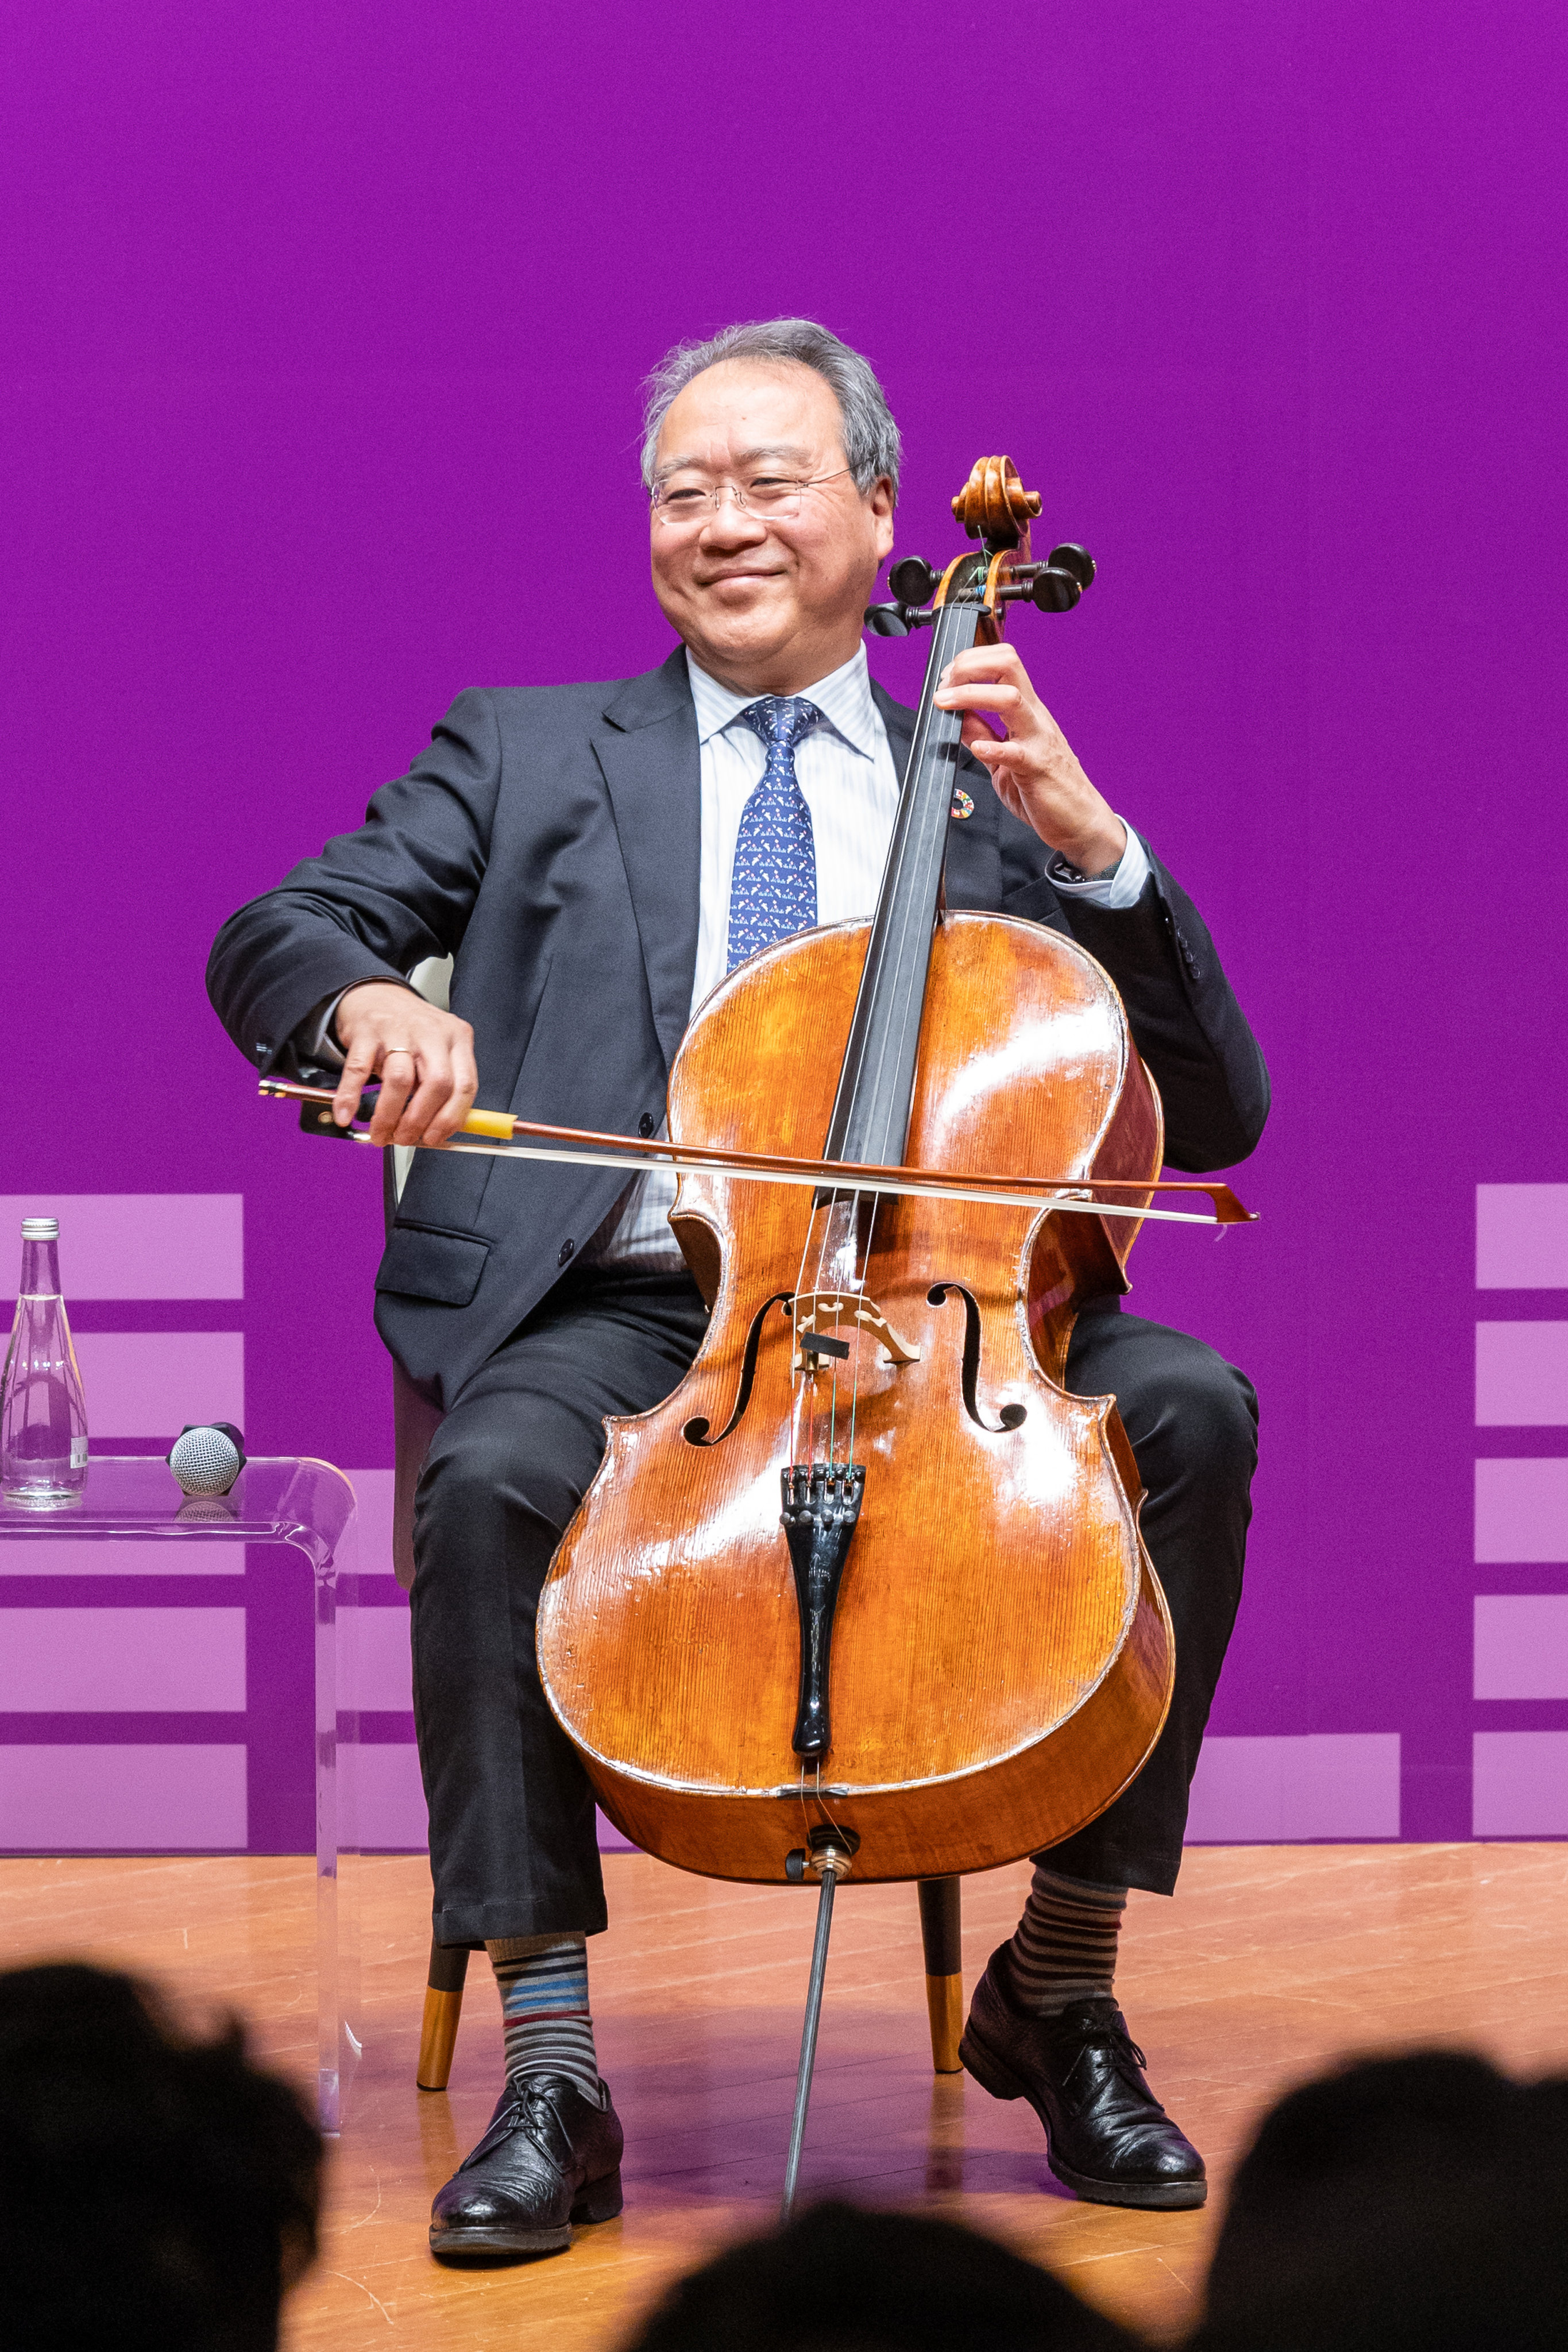 World renowned cellist Yo-Yo Ma spoke at Chinese University on Tuesday, ending his dialogue session with a performance. Photo: CUHK 